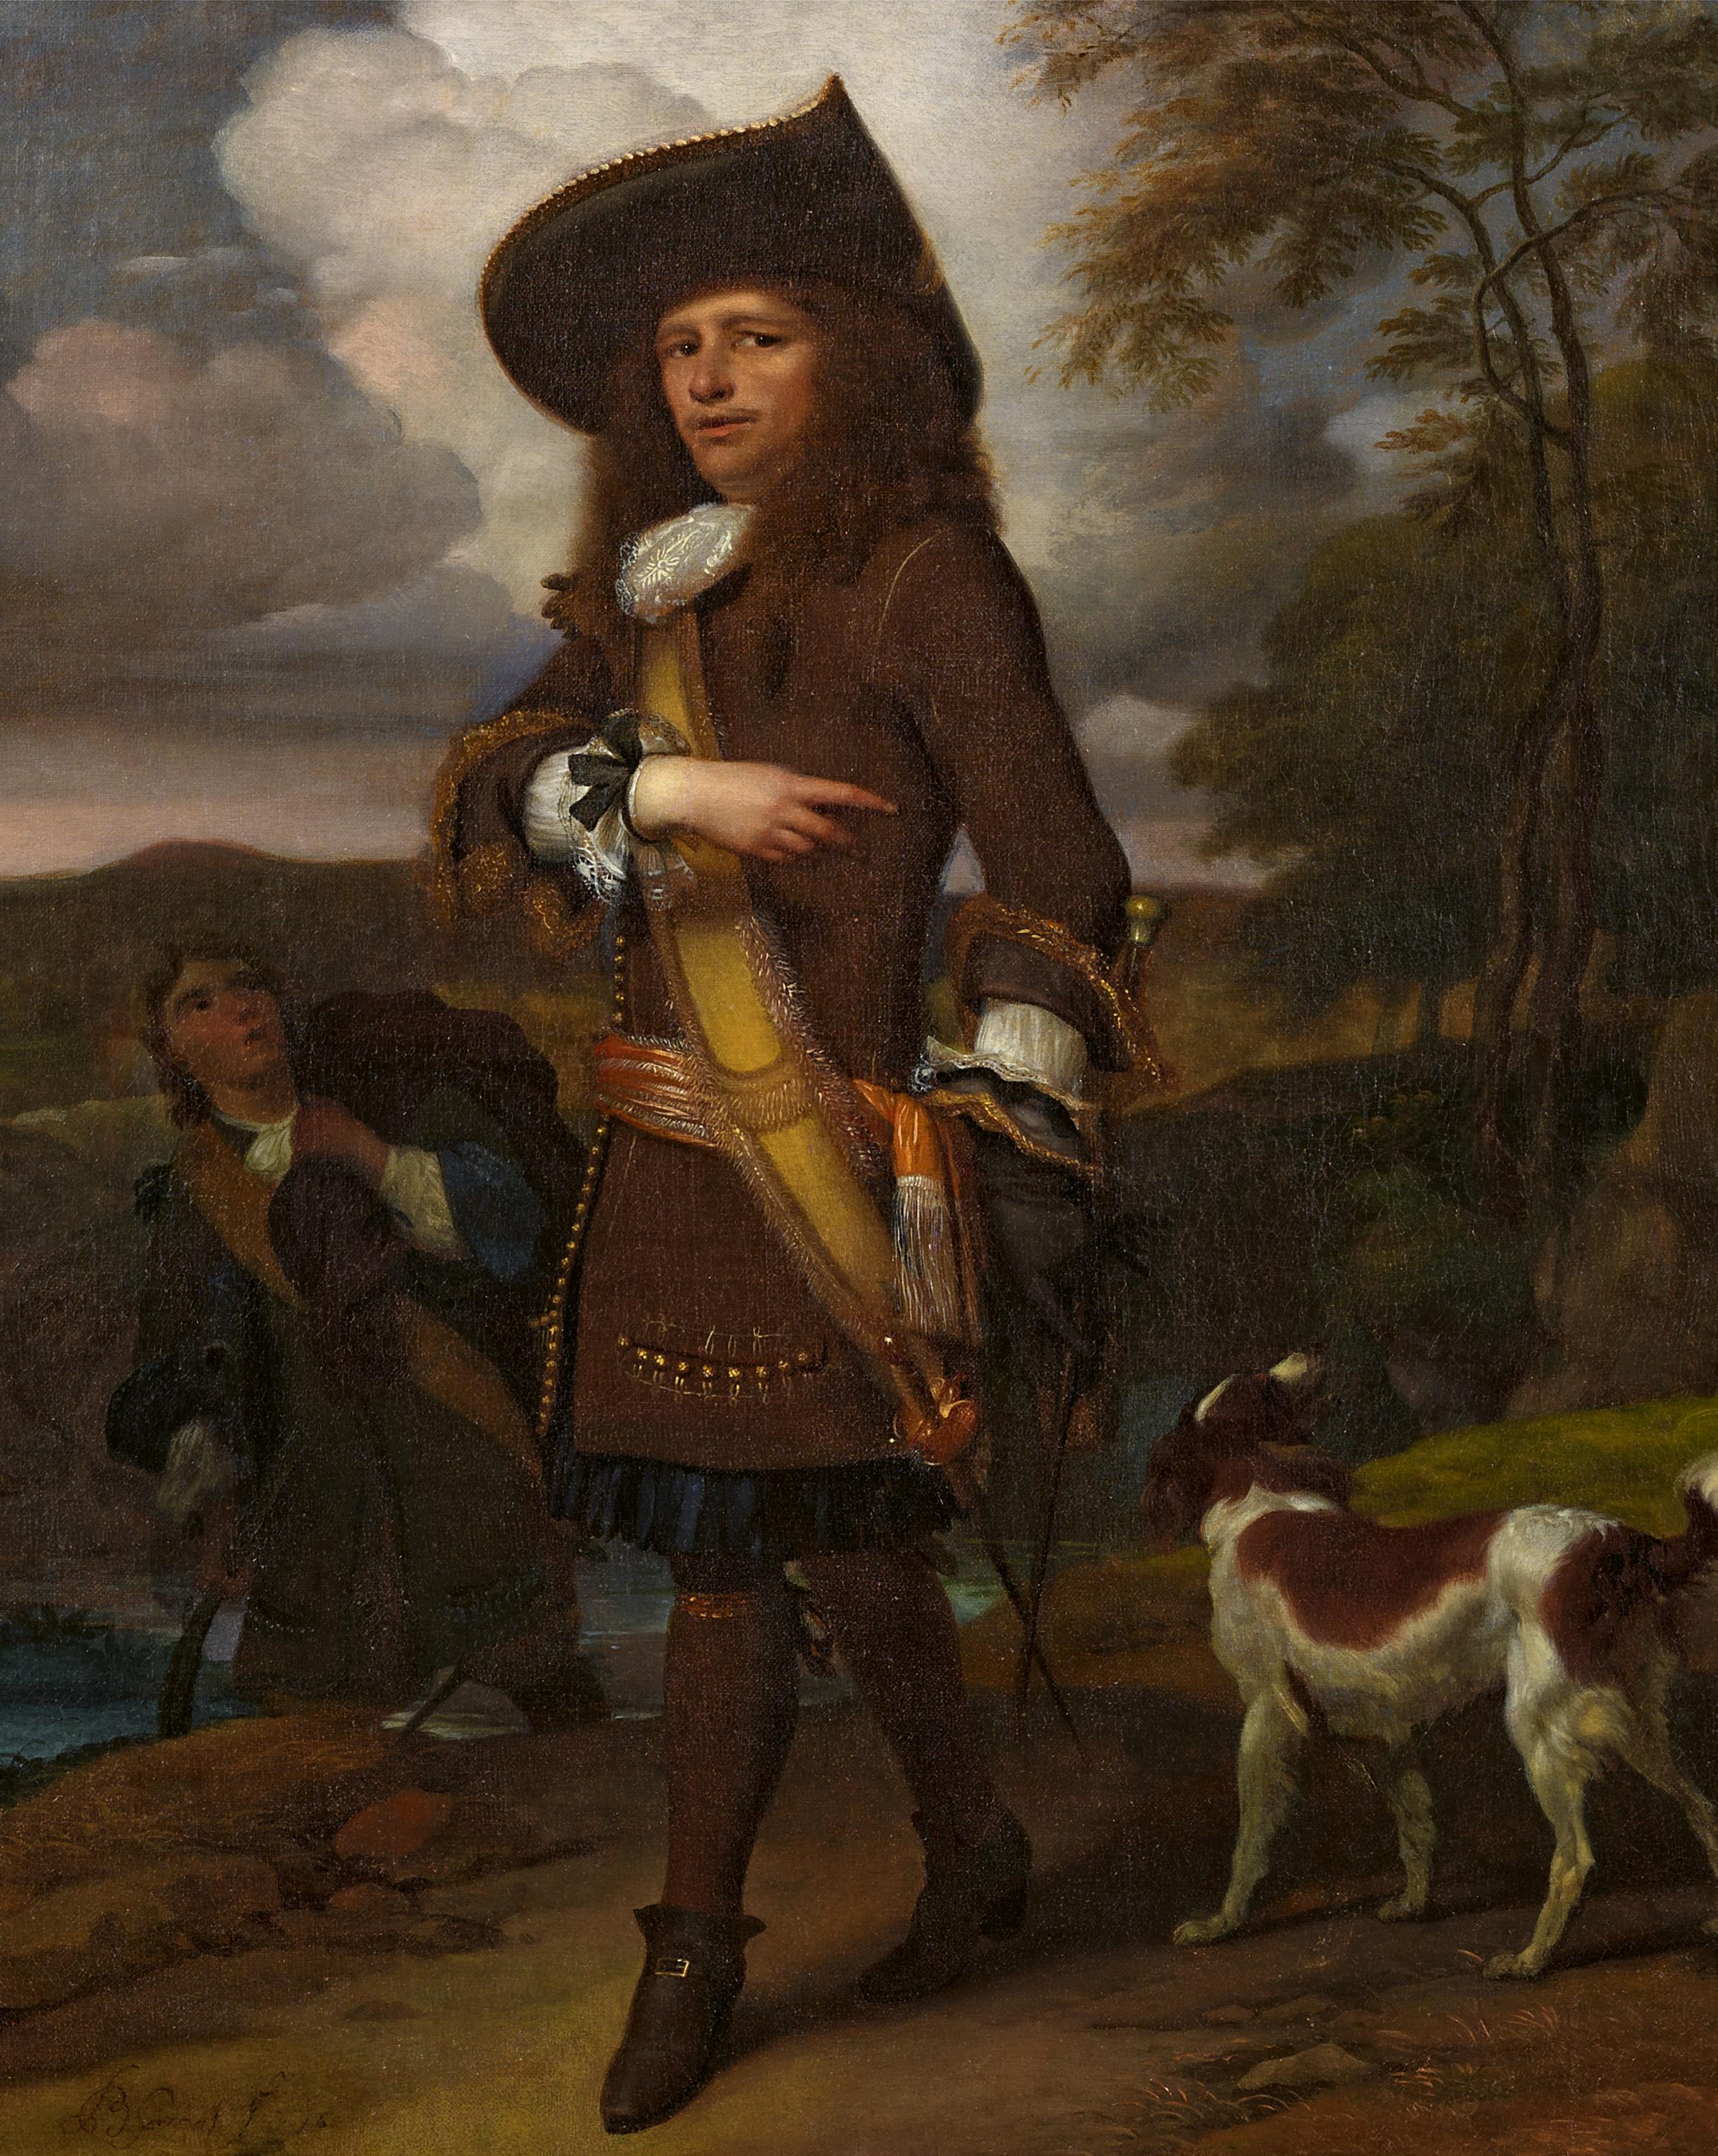 GRAAT, BARENDAmsterdam 1628 - 1708Title: Portrait of a Nobleman with Hunting Assistants and Hound.